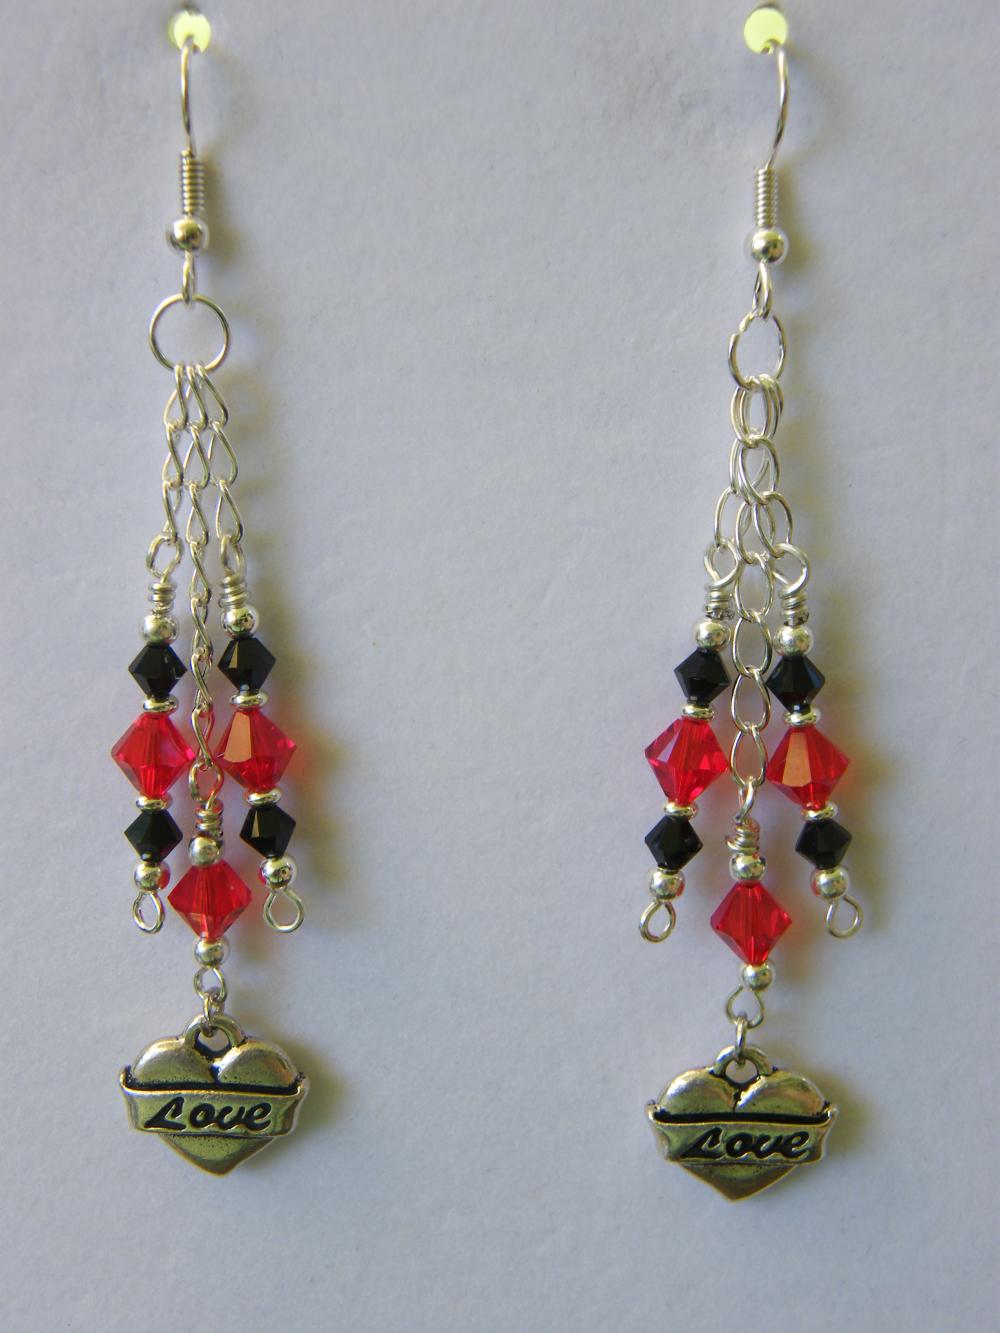 Earrings, Red & Black Swarovski Crystals With Love Charm